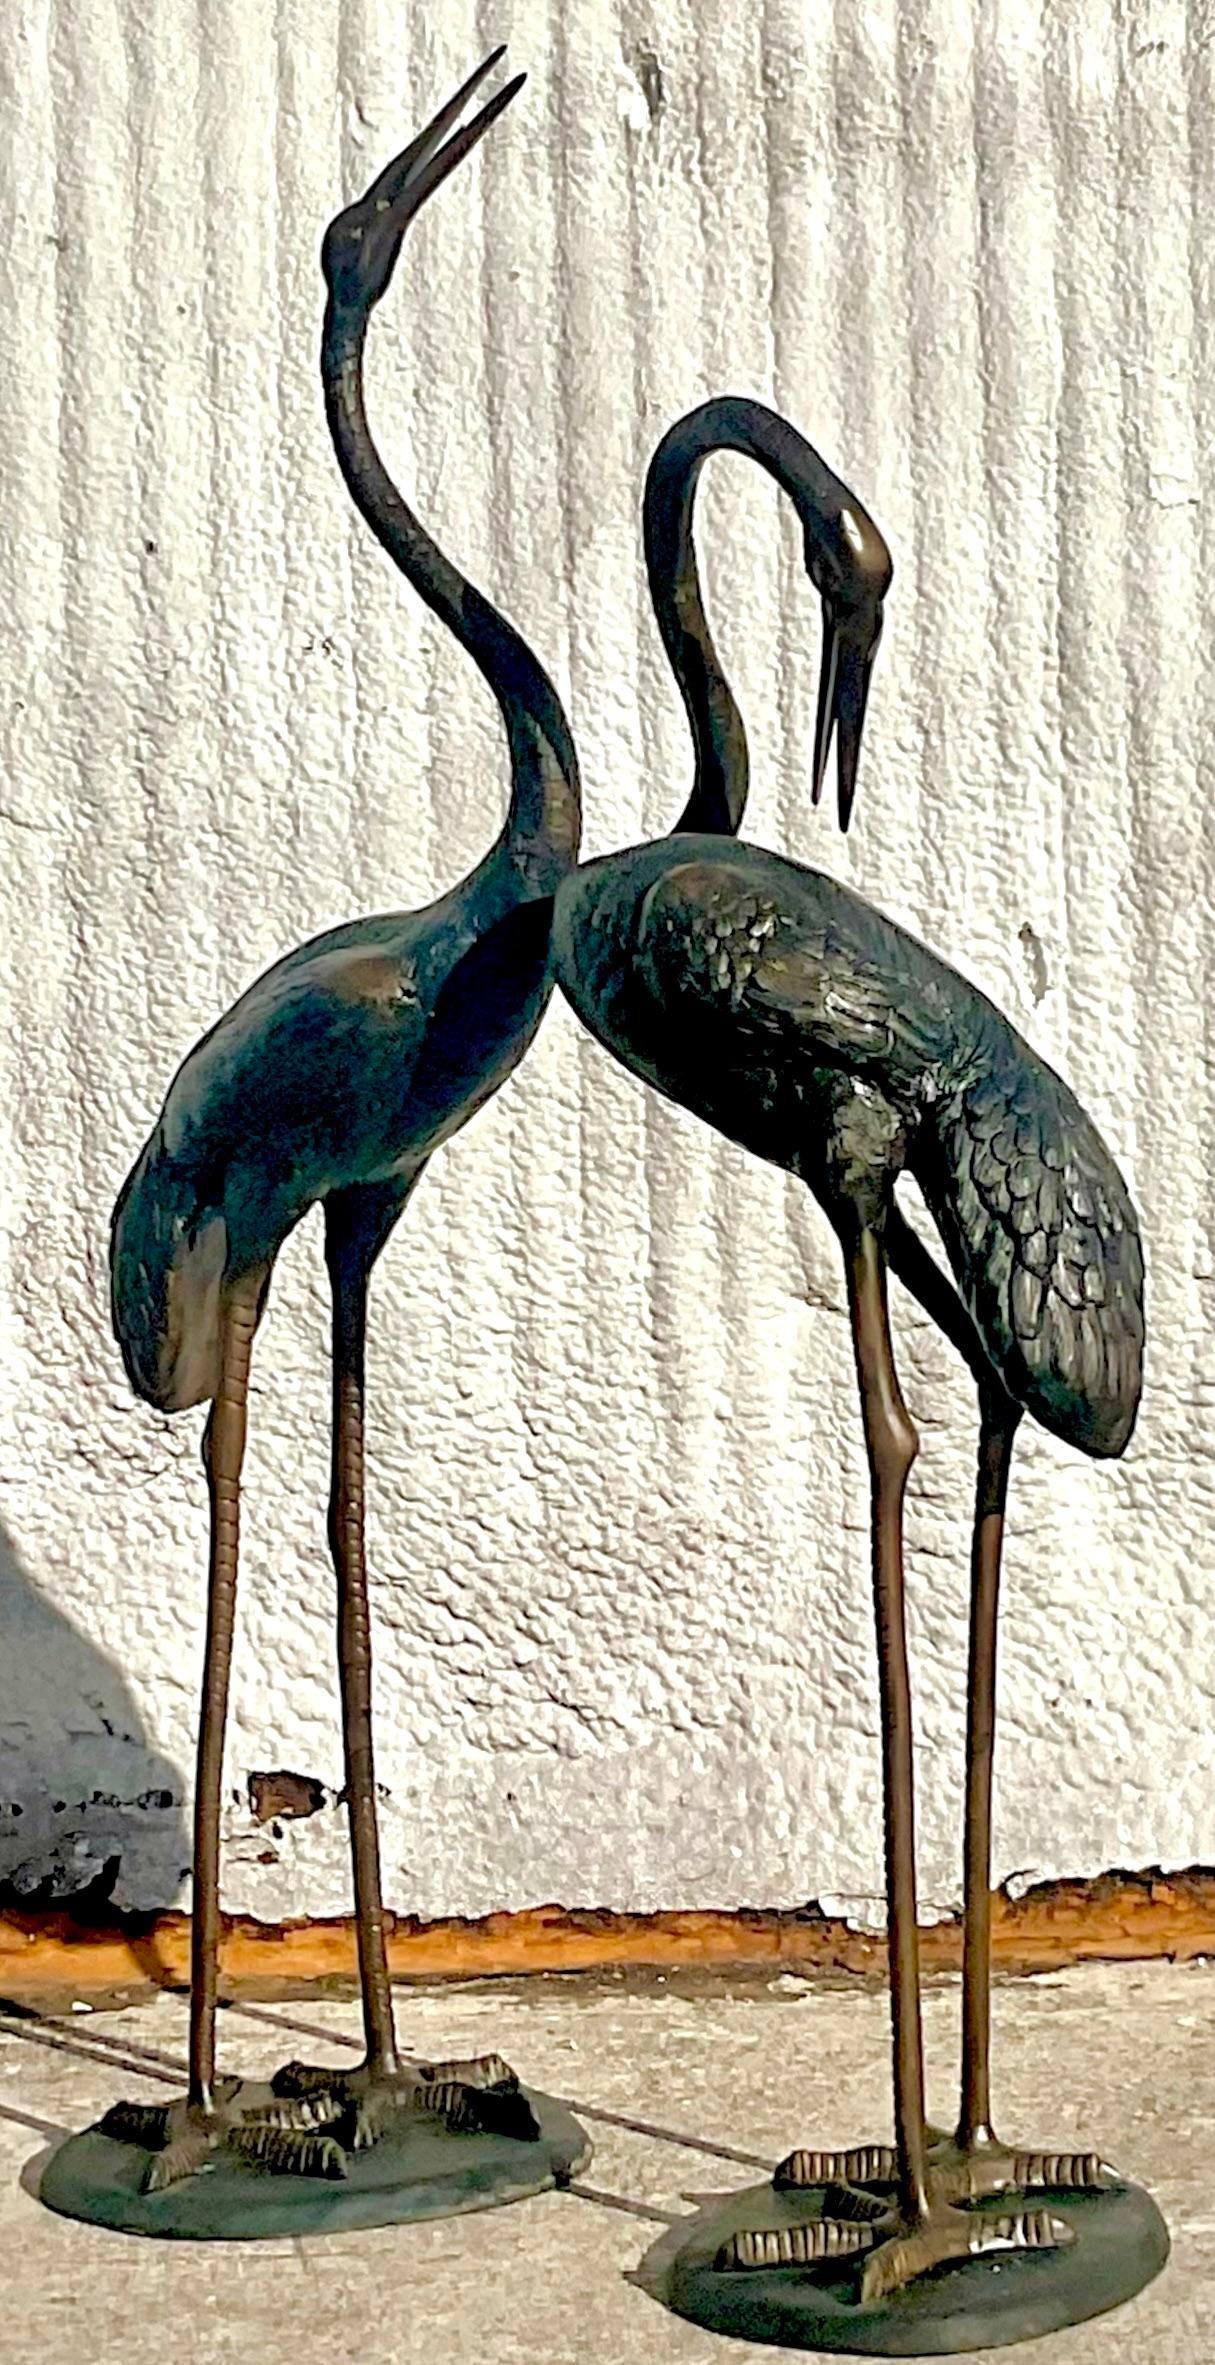 A stunning set of two vintage Cranes. Monumental in size and drama. Solid bronze construction with a beautiful patina from time. Perfect indoors our outdoors. You decide! Acquired from a Palm a each estate.

Lower crane 18x18x48